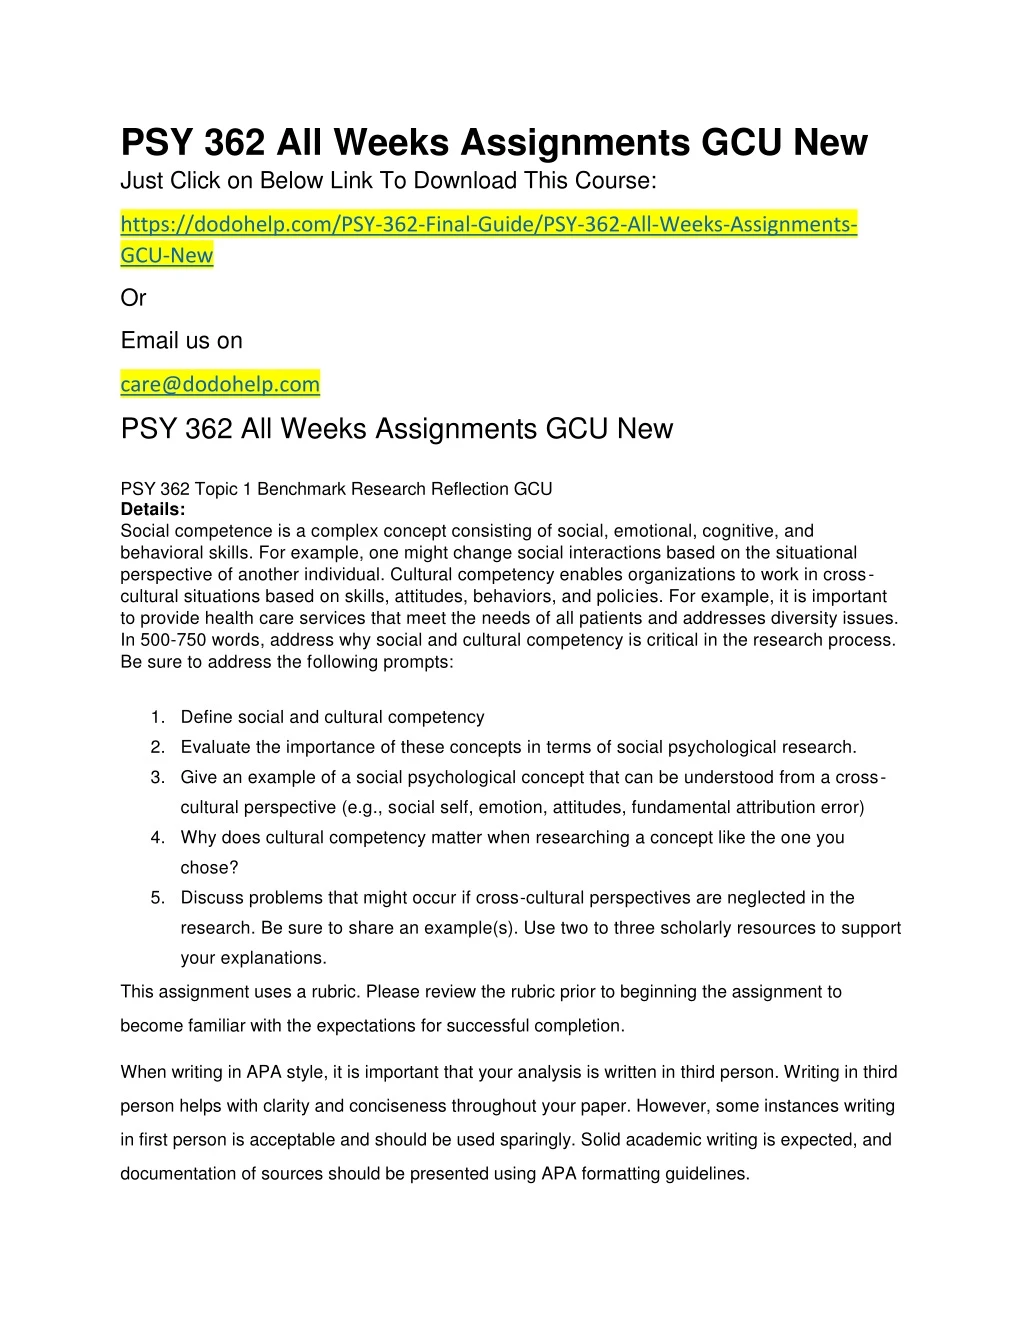 psy 362 all weeks assignments gcu new just click